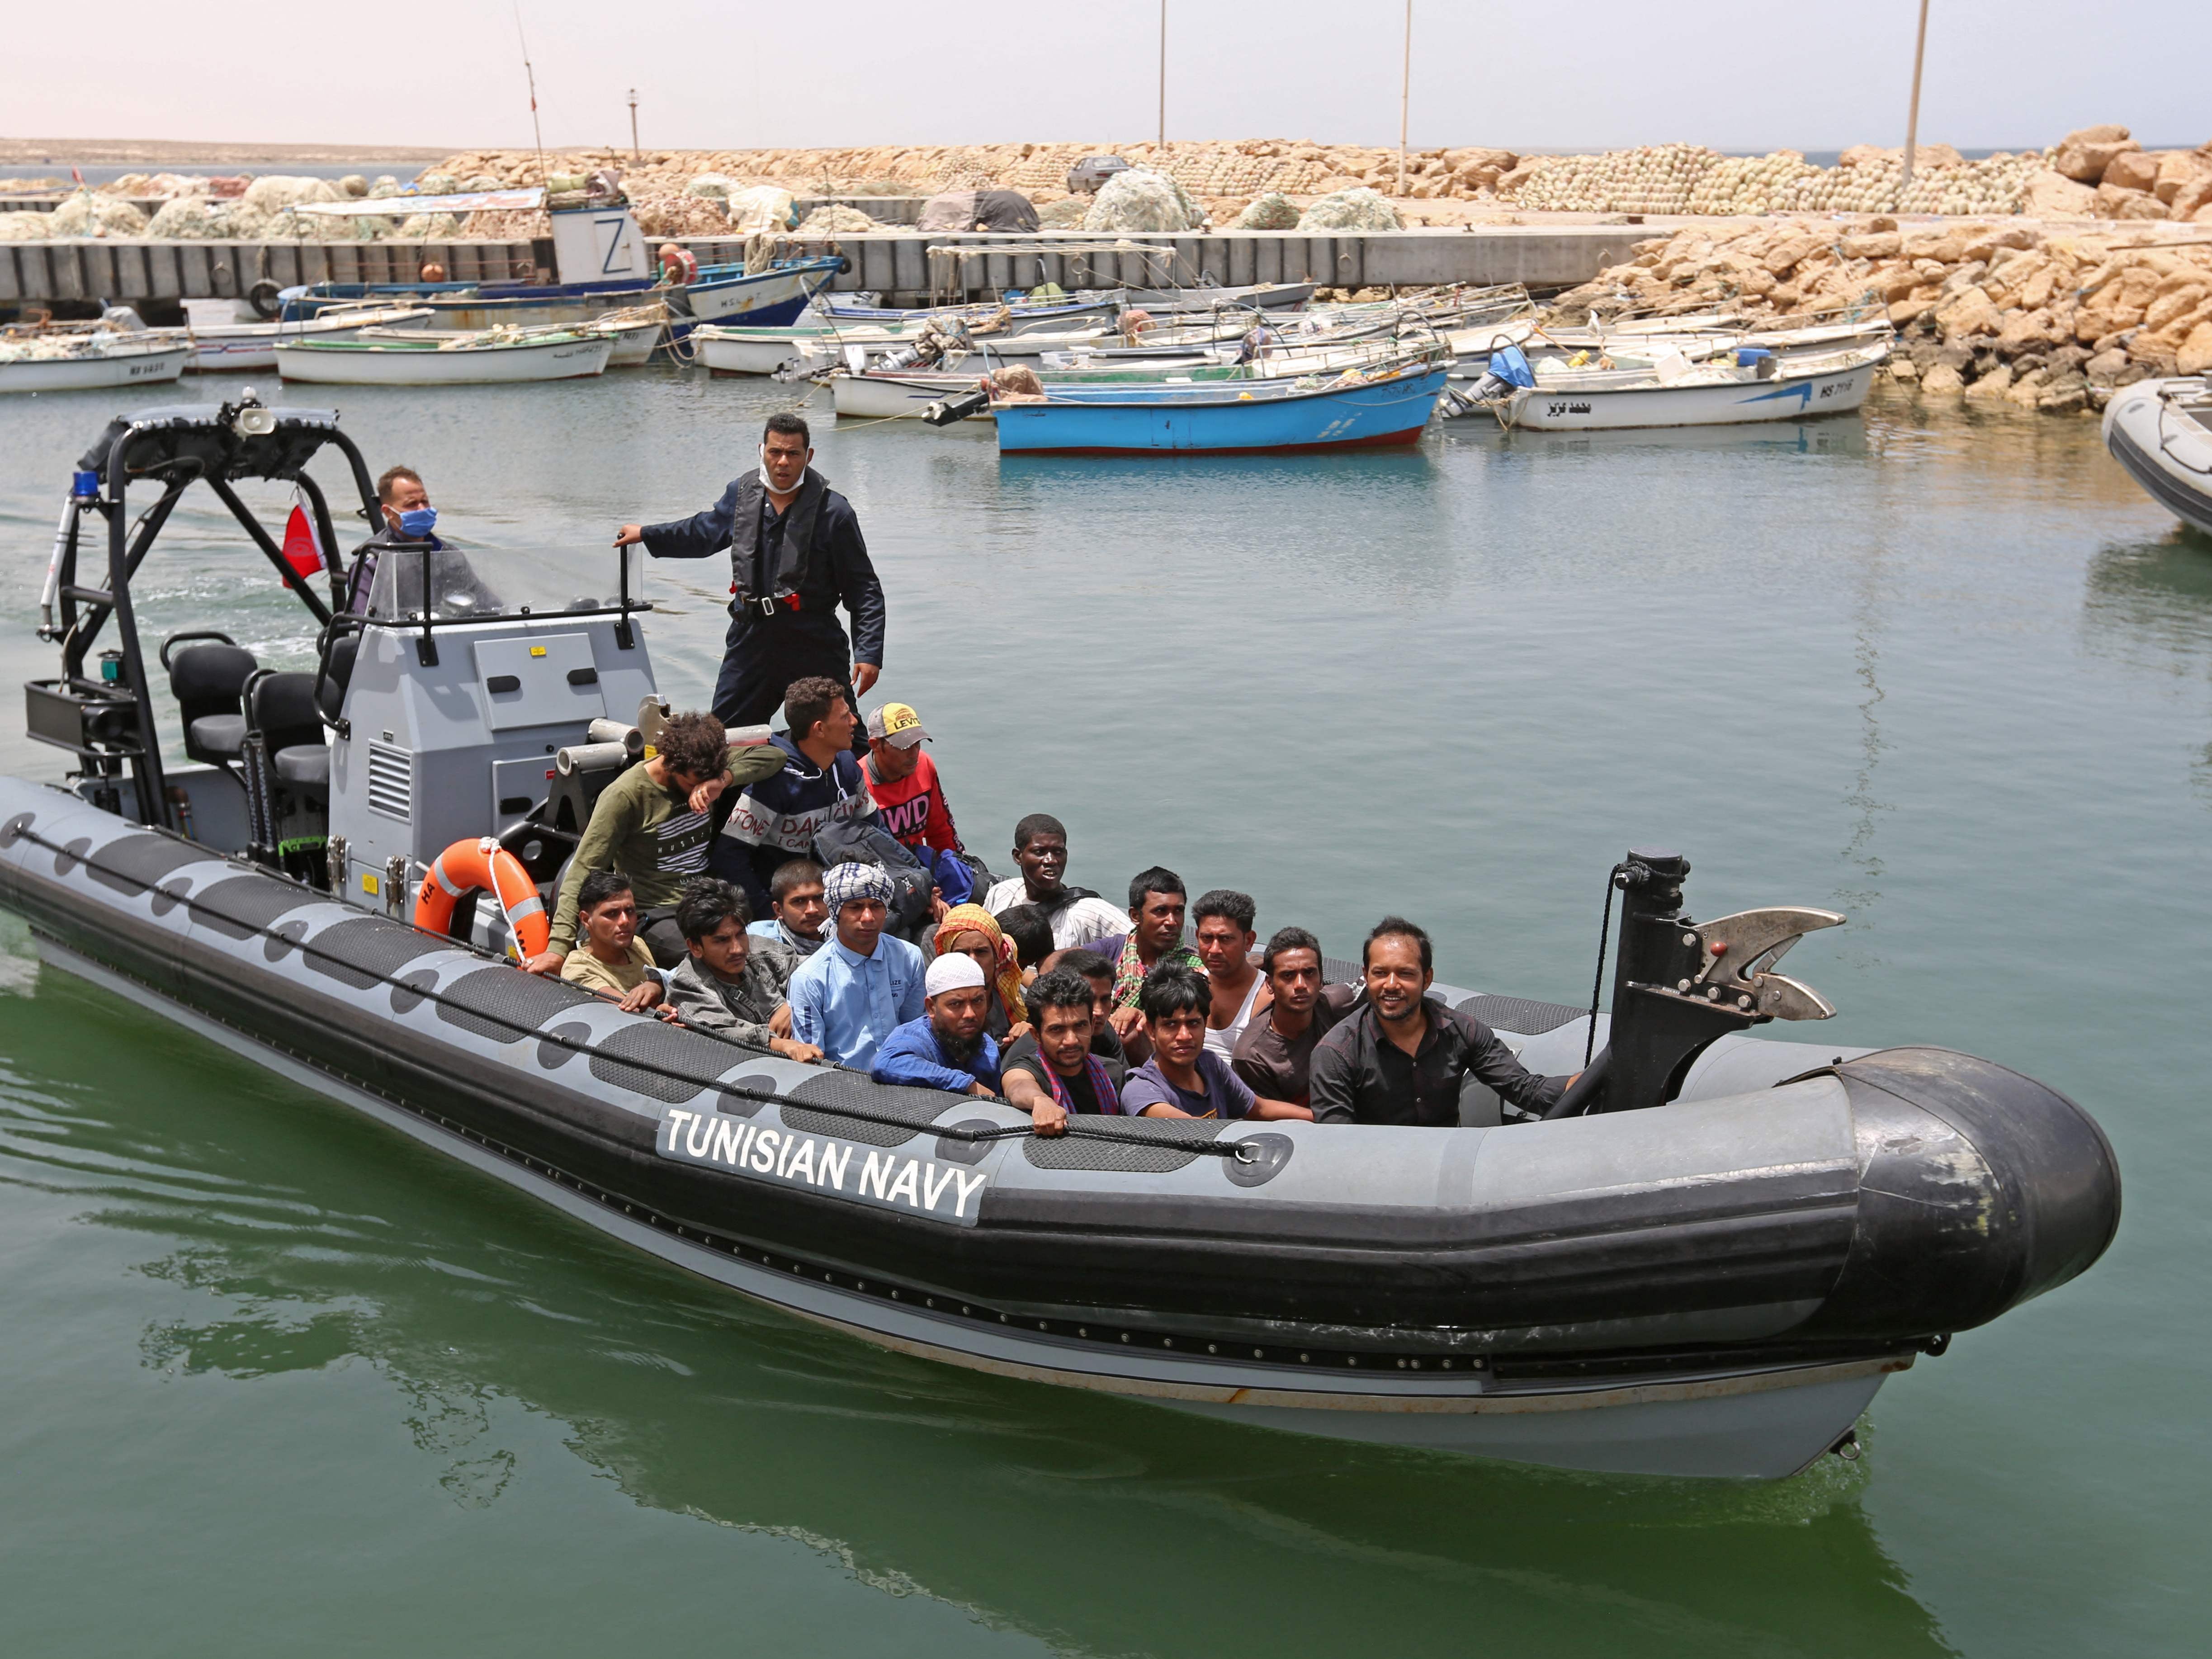 A group of migrants arrive at a port in southern Tunisia after being rescued during an attempted crossing of the Mediterrean on 27 June 2021